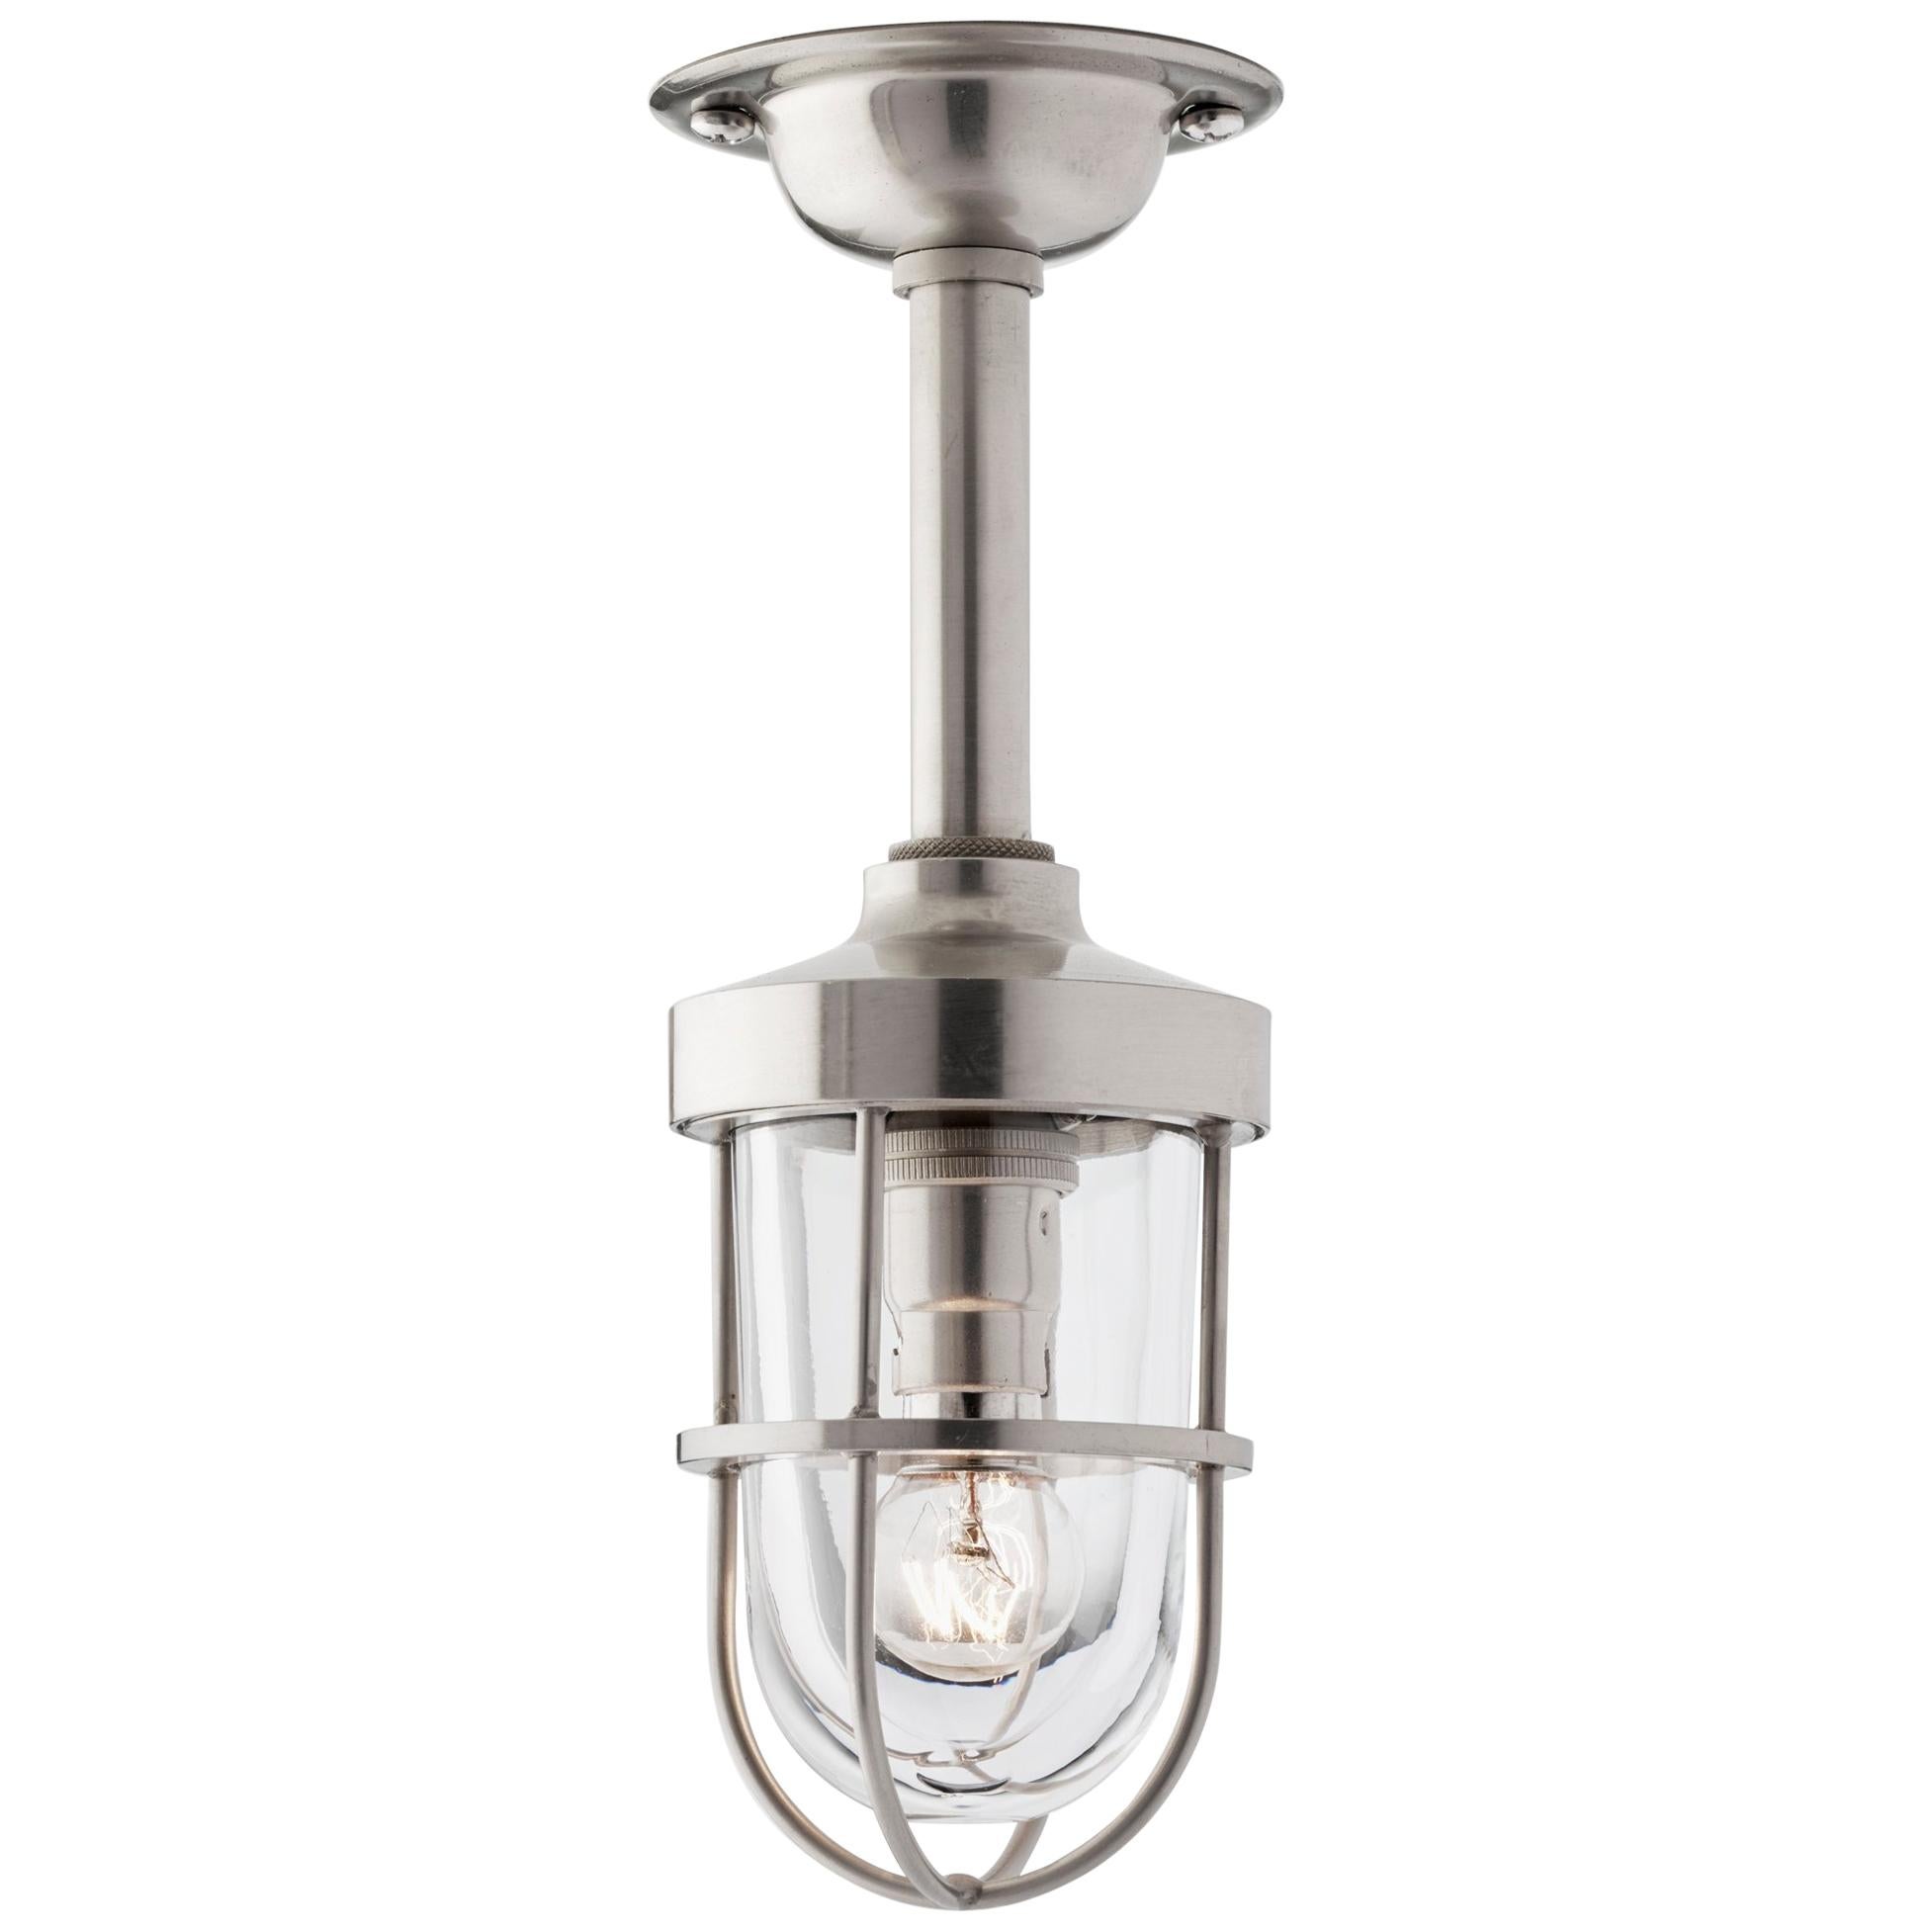 Tekna Bounty 12V Pendant Light with Brushed Nickel Finish and Clear Glass